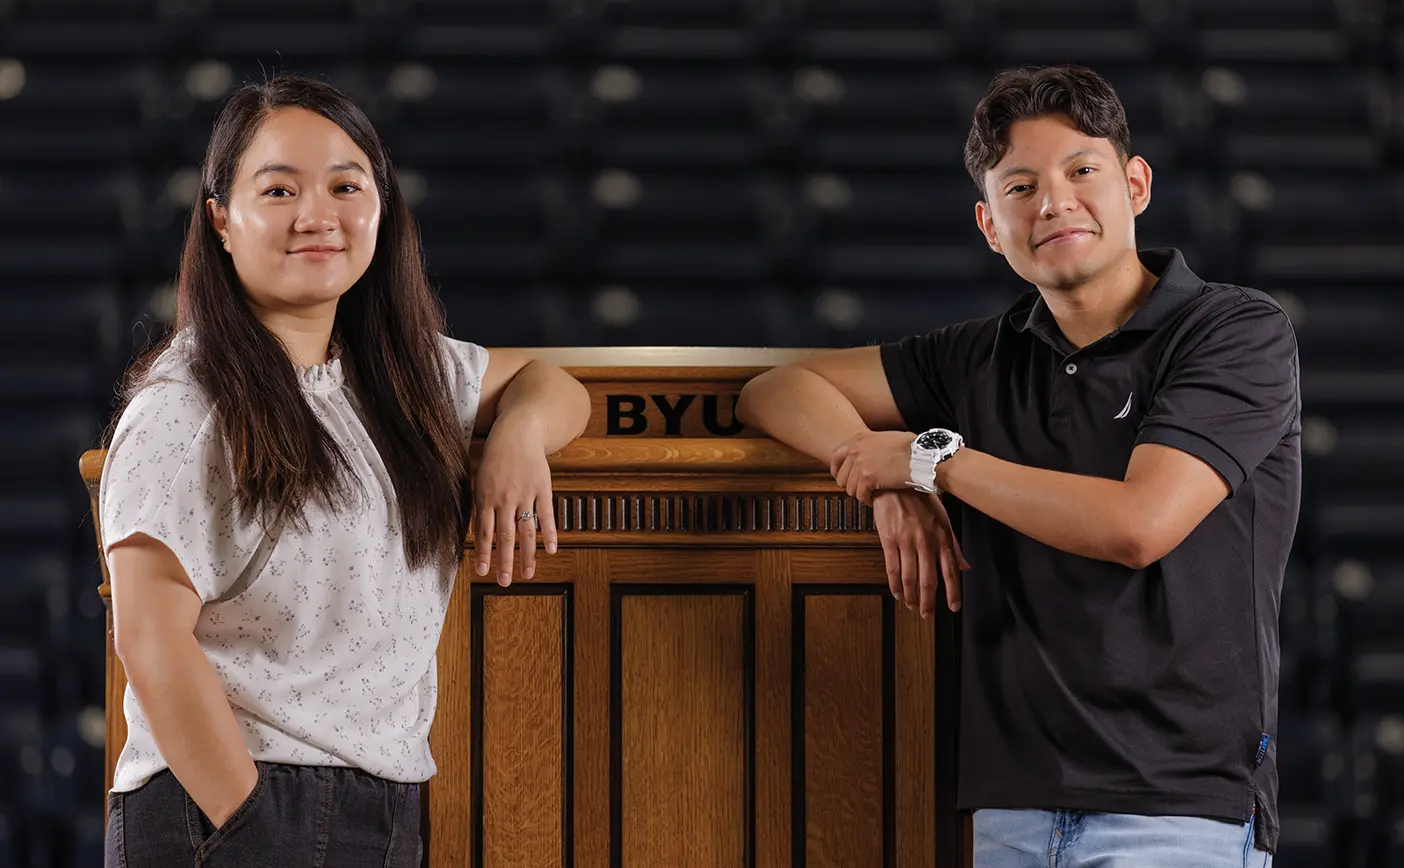 Two BYU Speeches translations students, a man and a woman, pose by a podium in the Marriott Center.